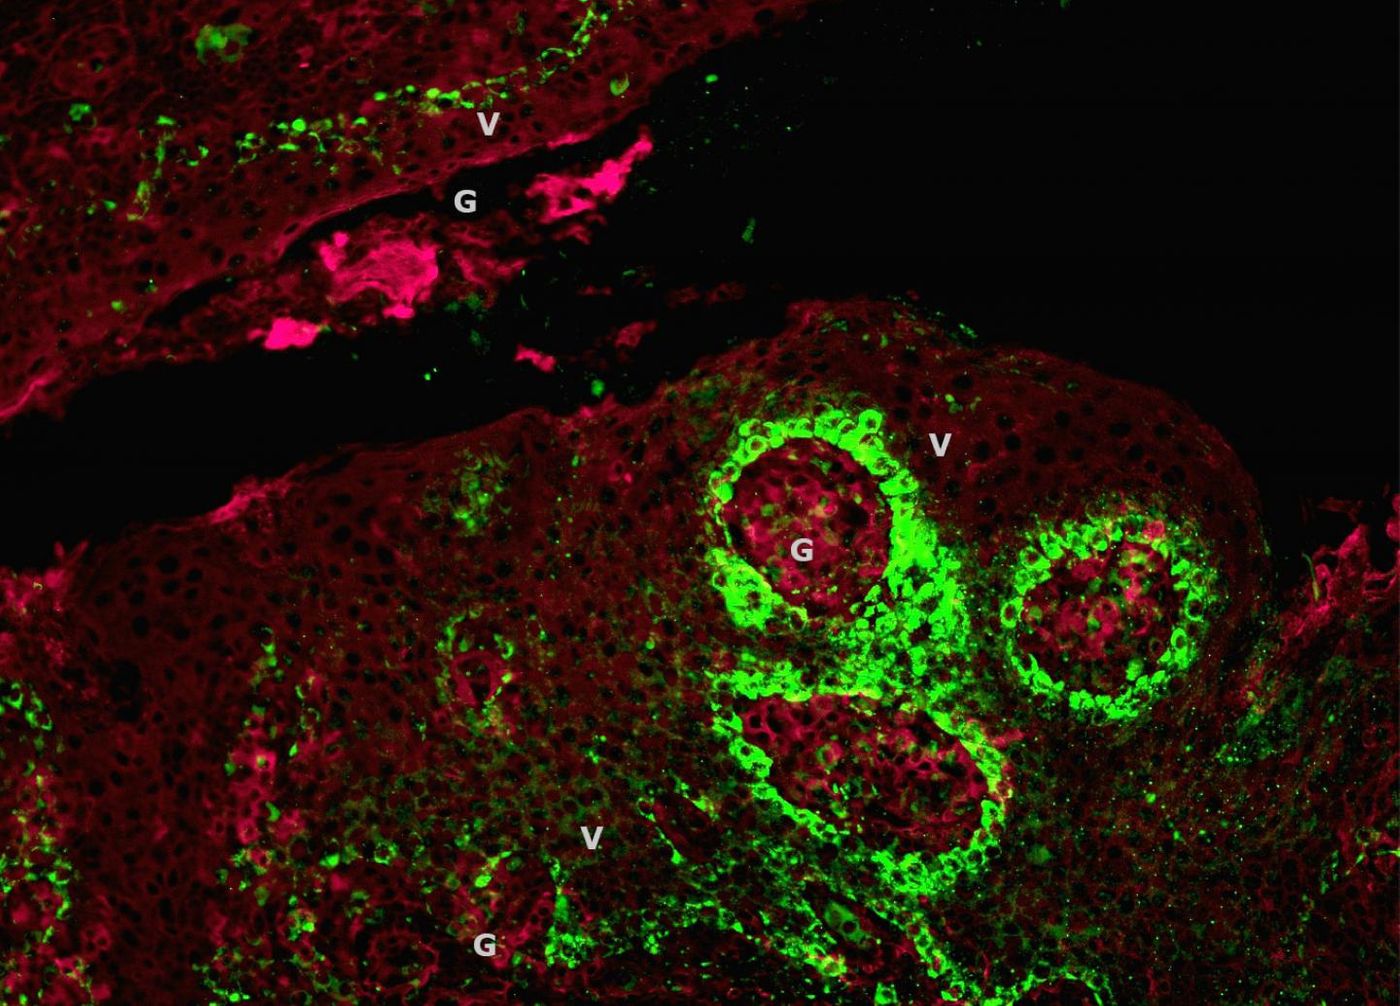 These are tonsil crypts with human papillomavirus (HPV; green) in epithelial and biofilm (red) layers ('V' = biofilm; 'G' = HPV). Credit: Katherine Rieth, MD